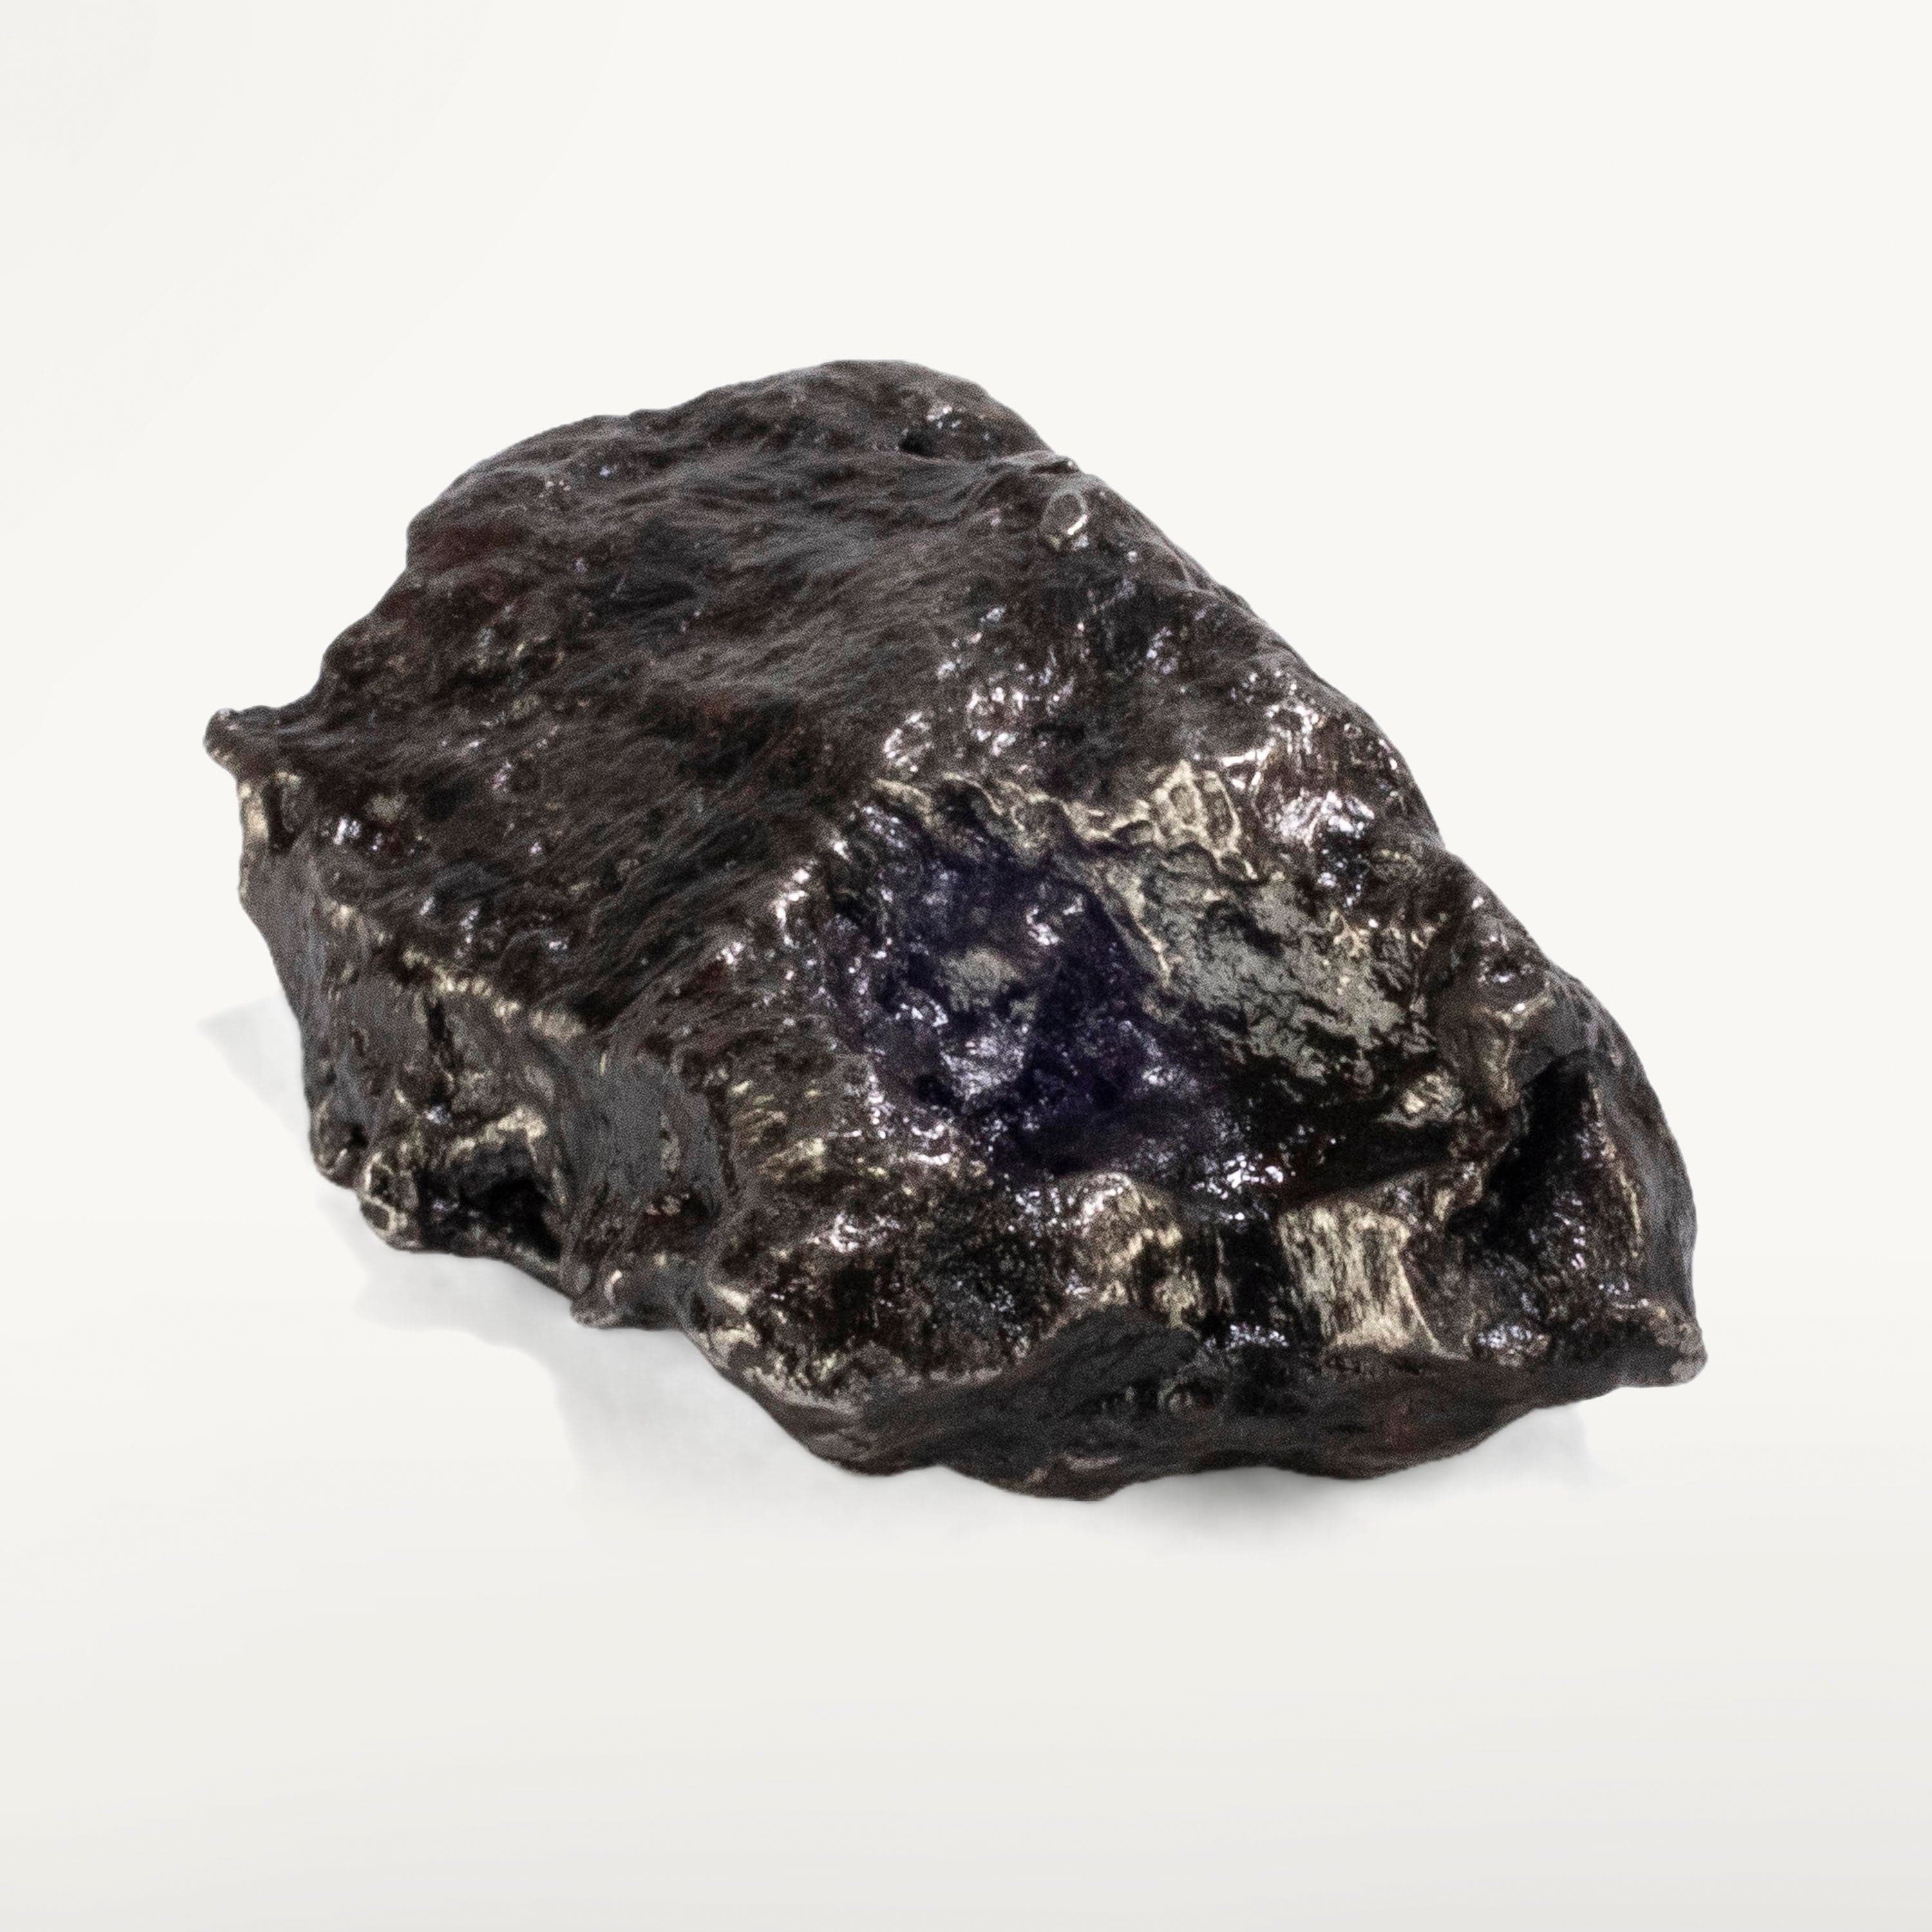 Kalifano Meteorites Sikhote-Alin Iron Meteorite discovered in Russia: 42-50 grams MTS1000